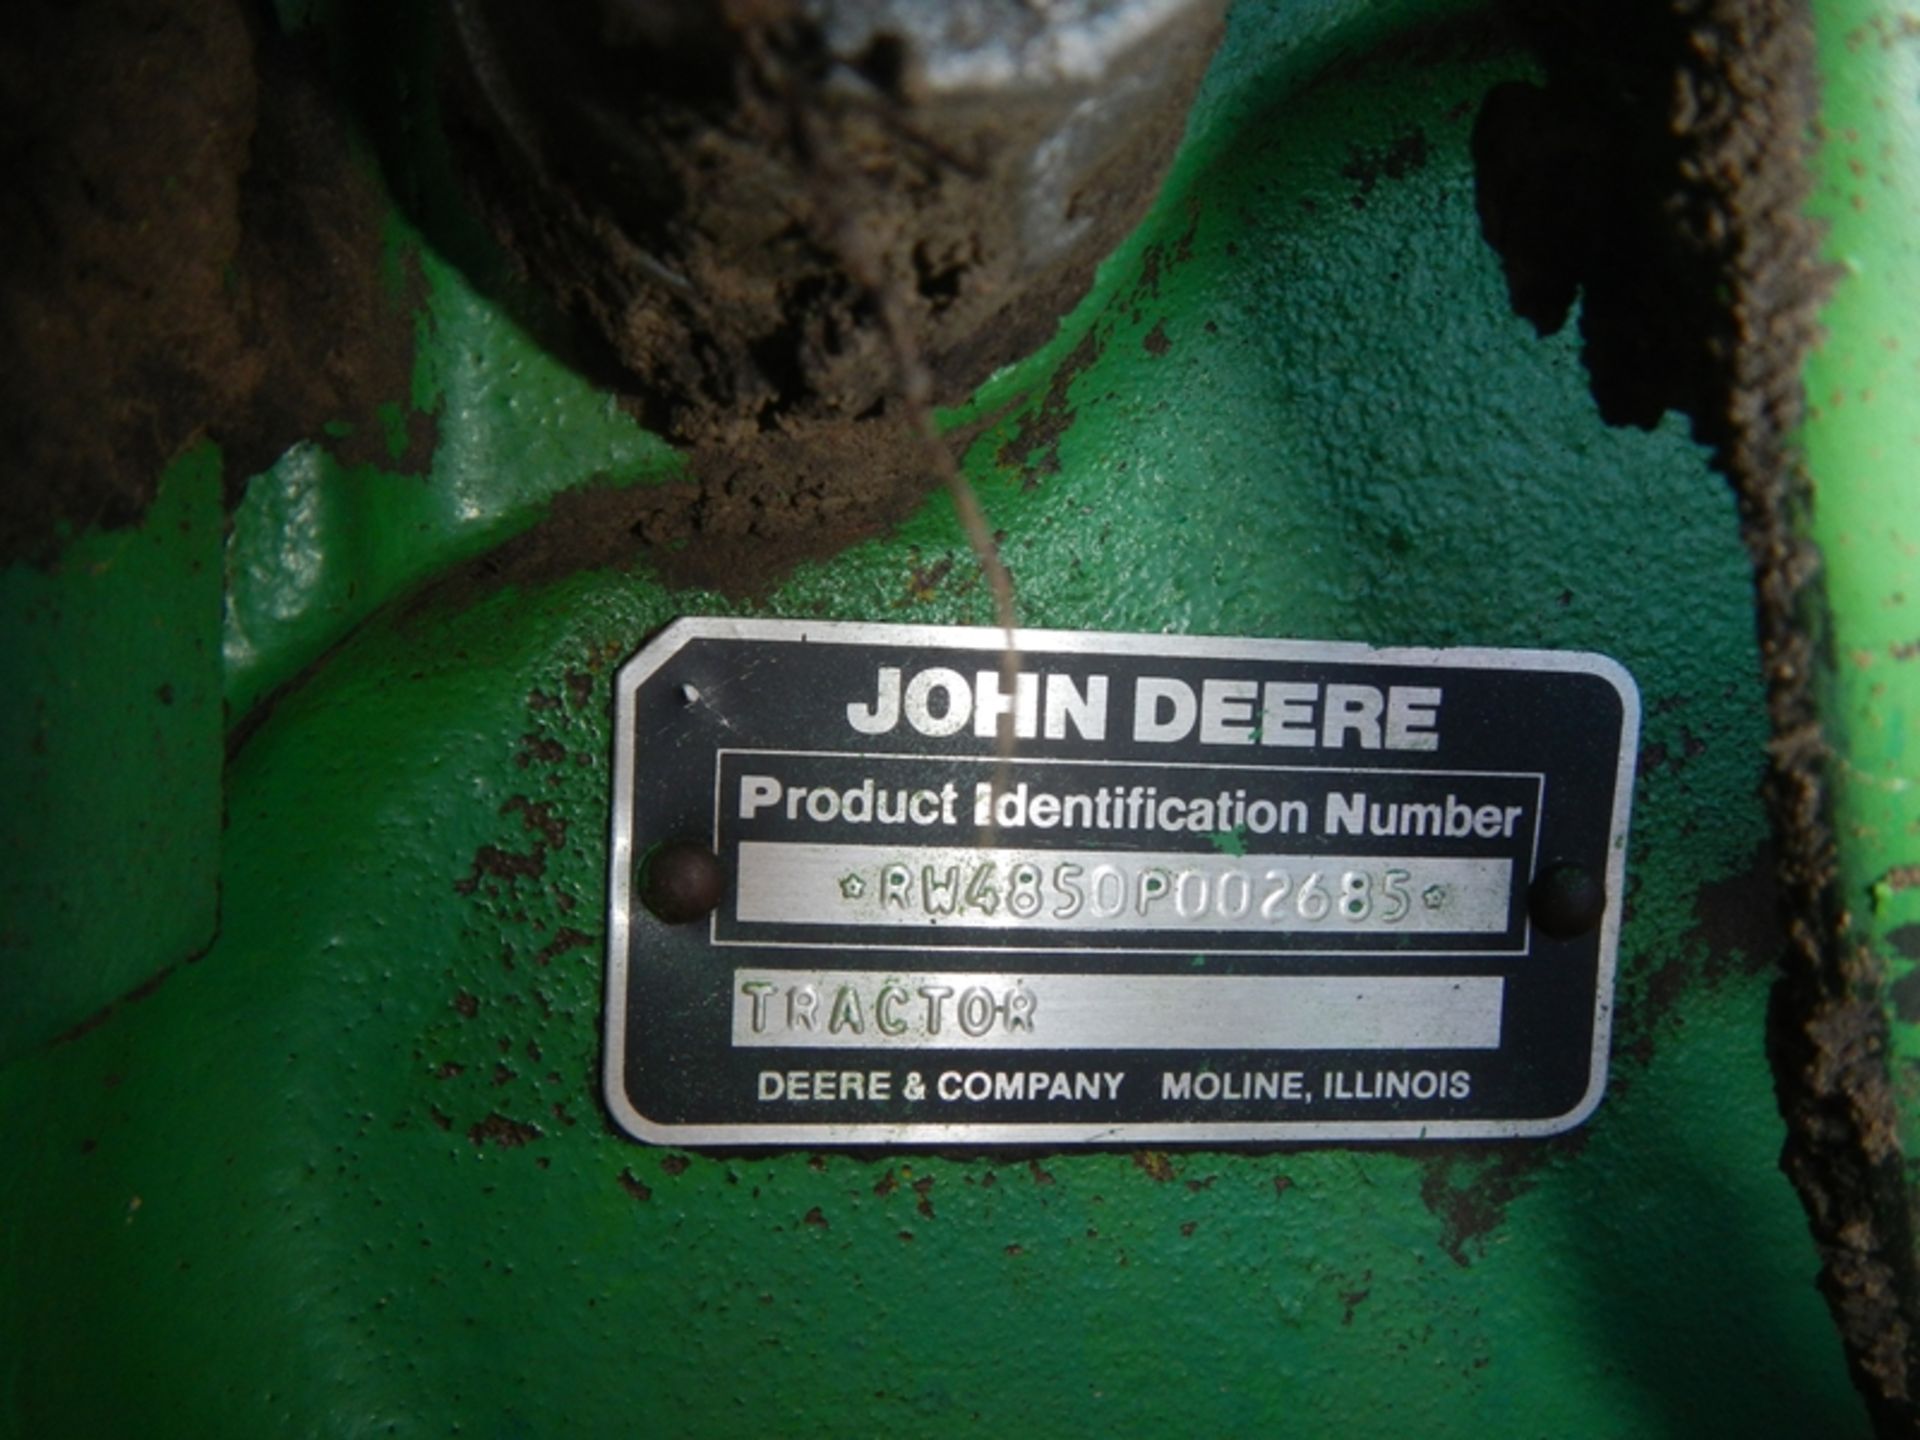 JD 4850 duals, weights, quick hitch, RW4850P002685 cannot read hours - Image 8 of 8